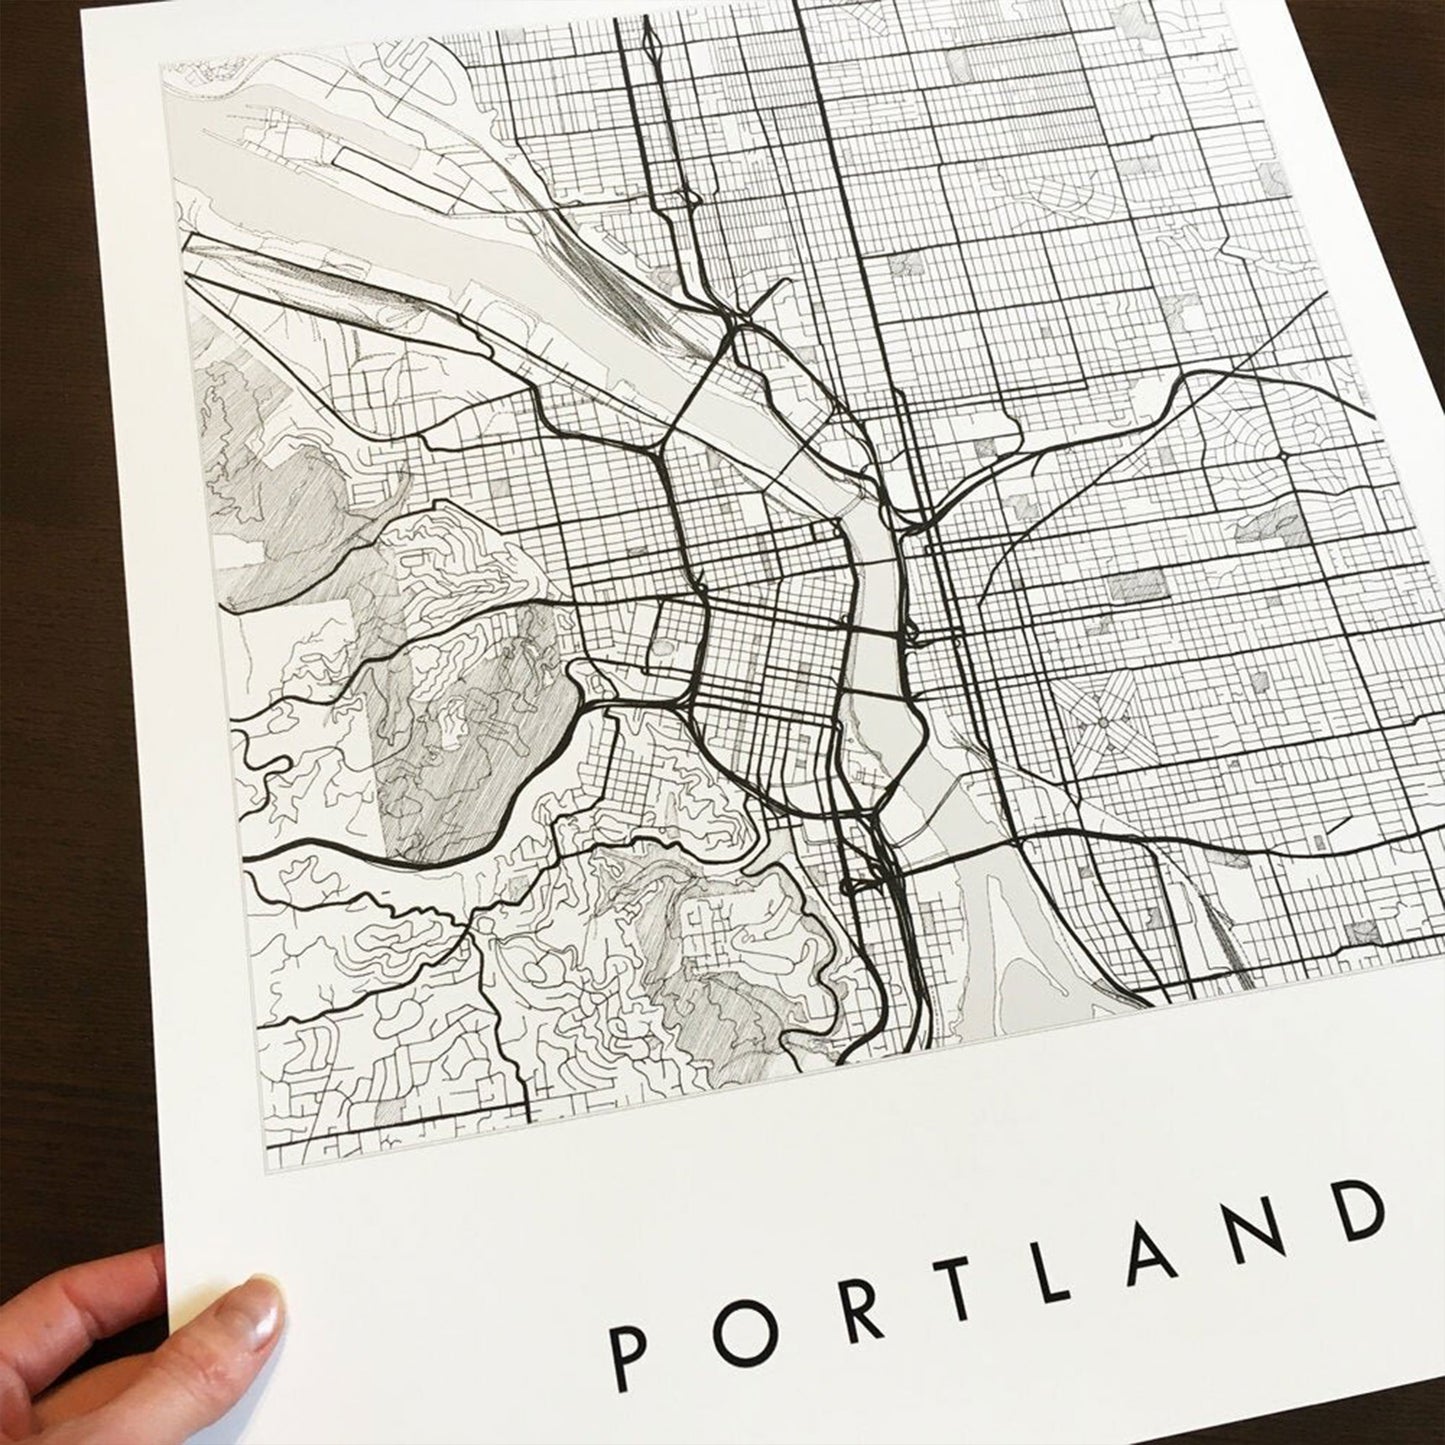 Turn-of-the-Centuries: Portland City Lines Print